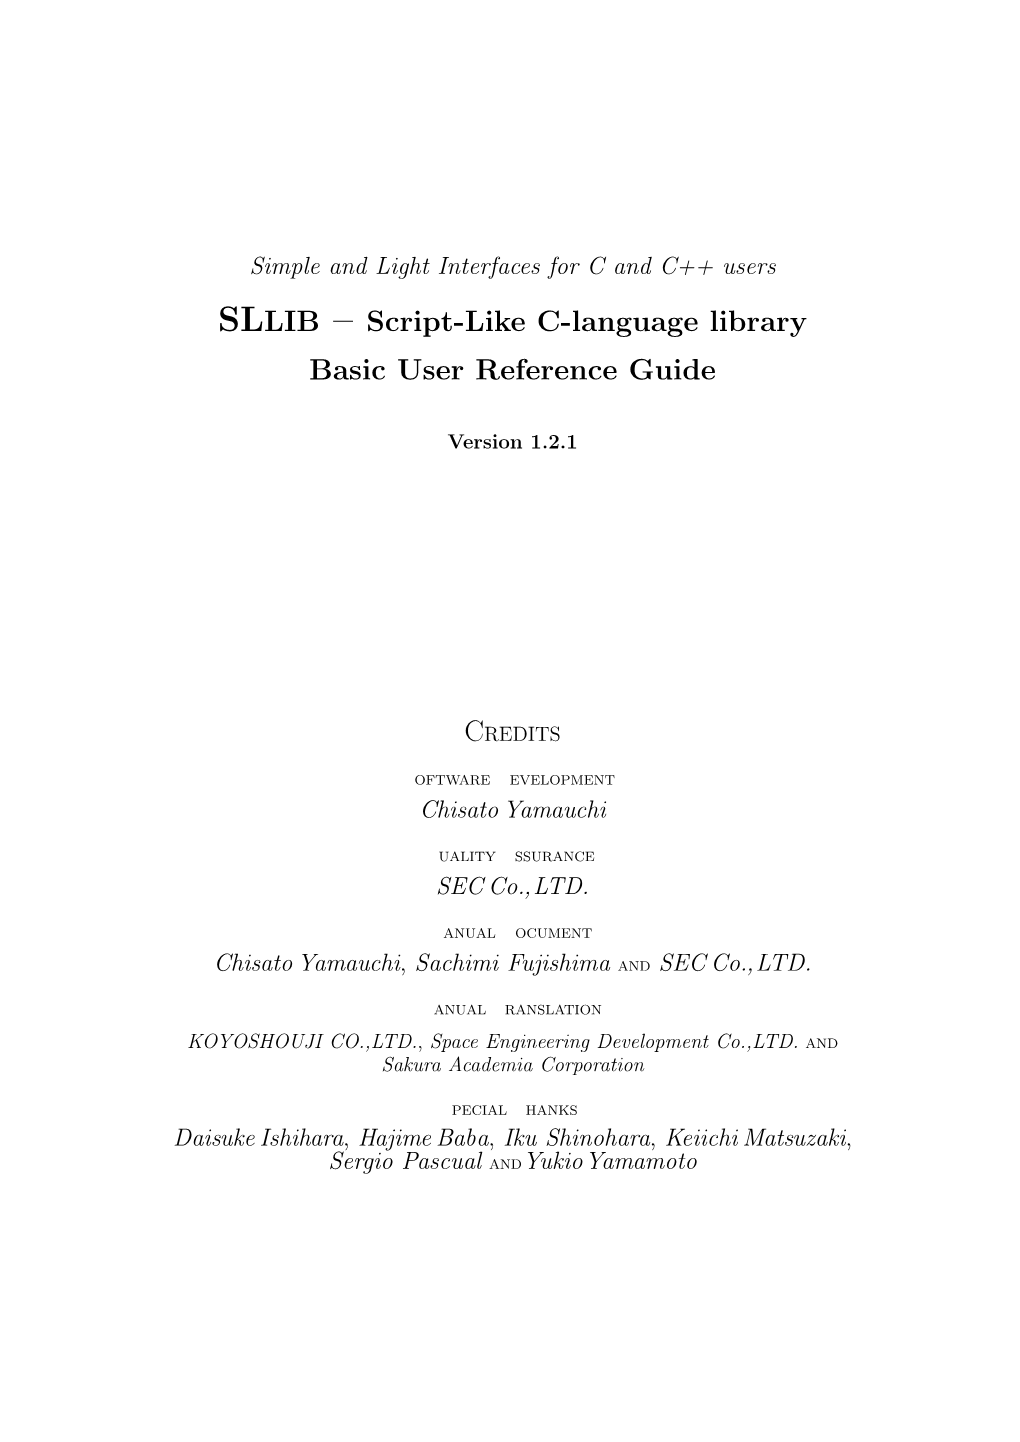 SLLIB – Script-Like C-Language Library Basic User Reference Guide